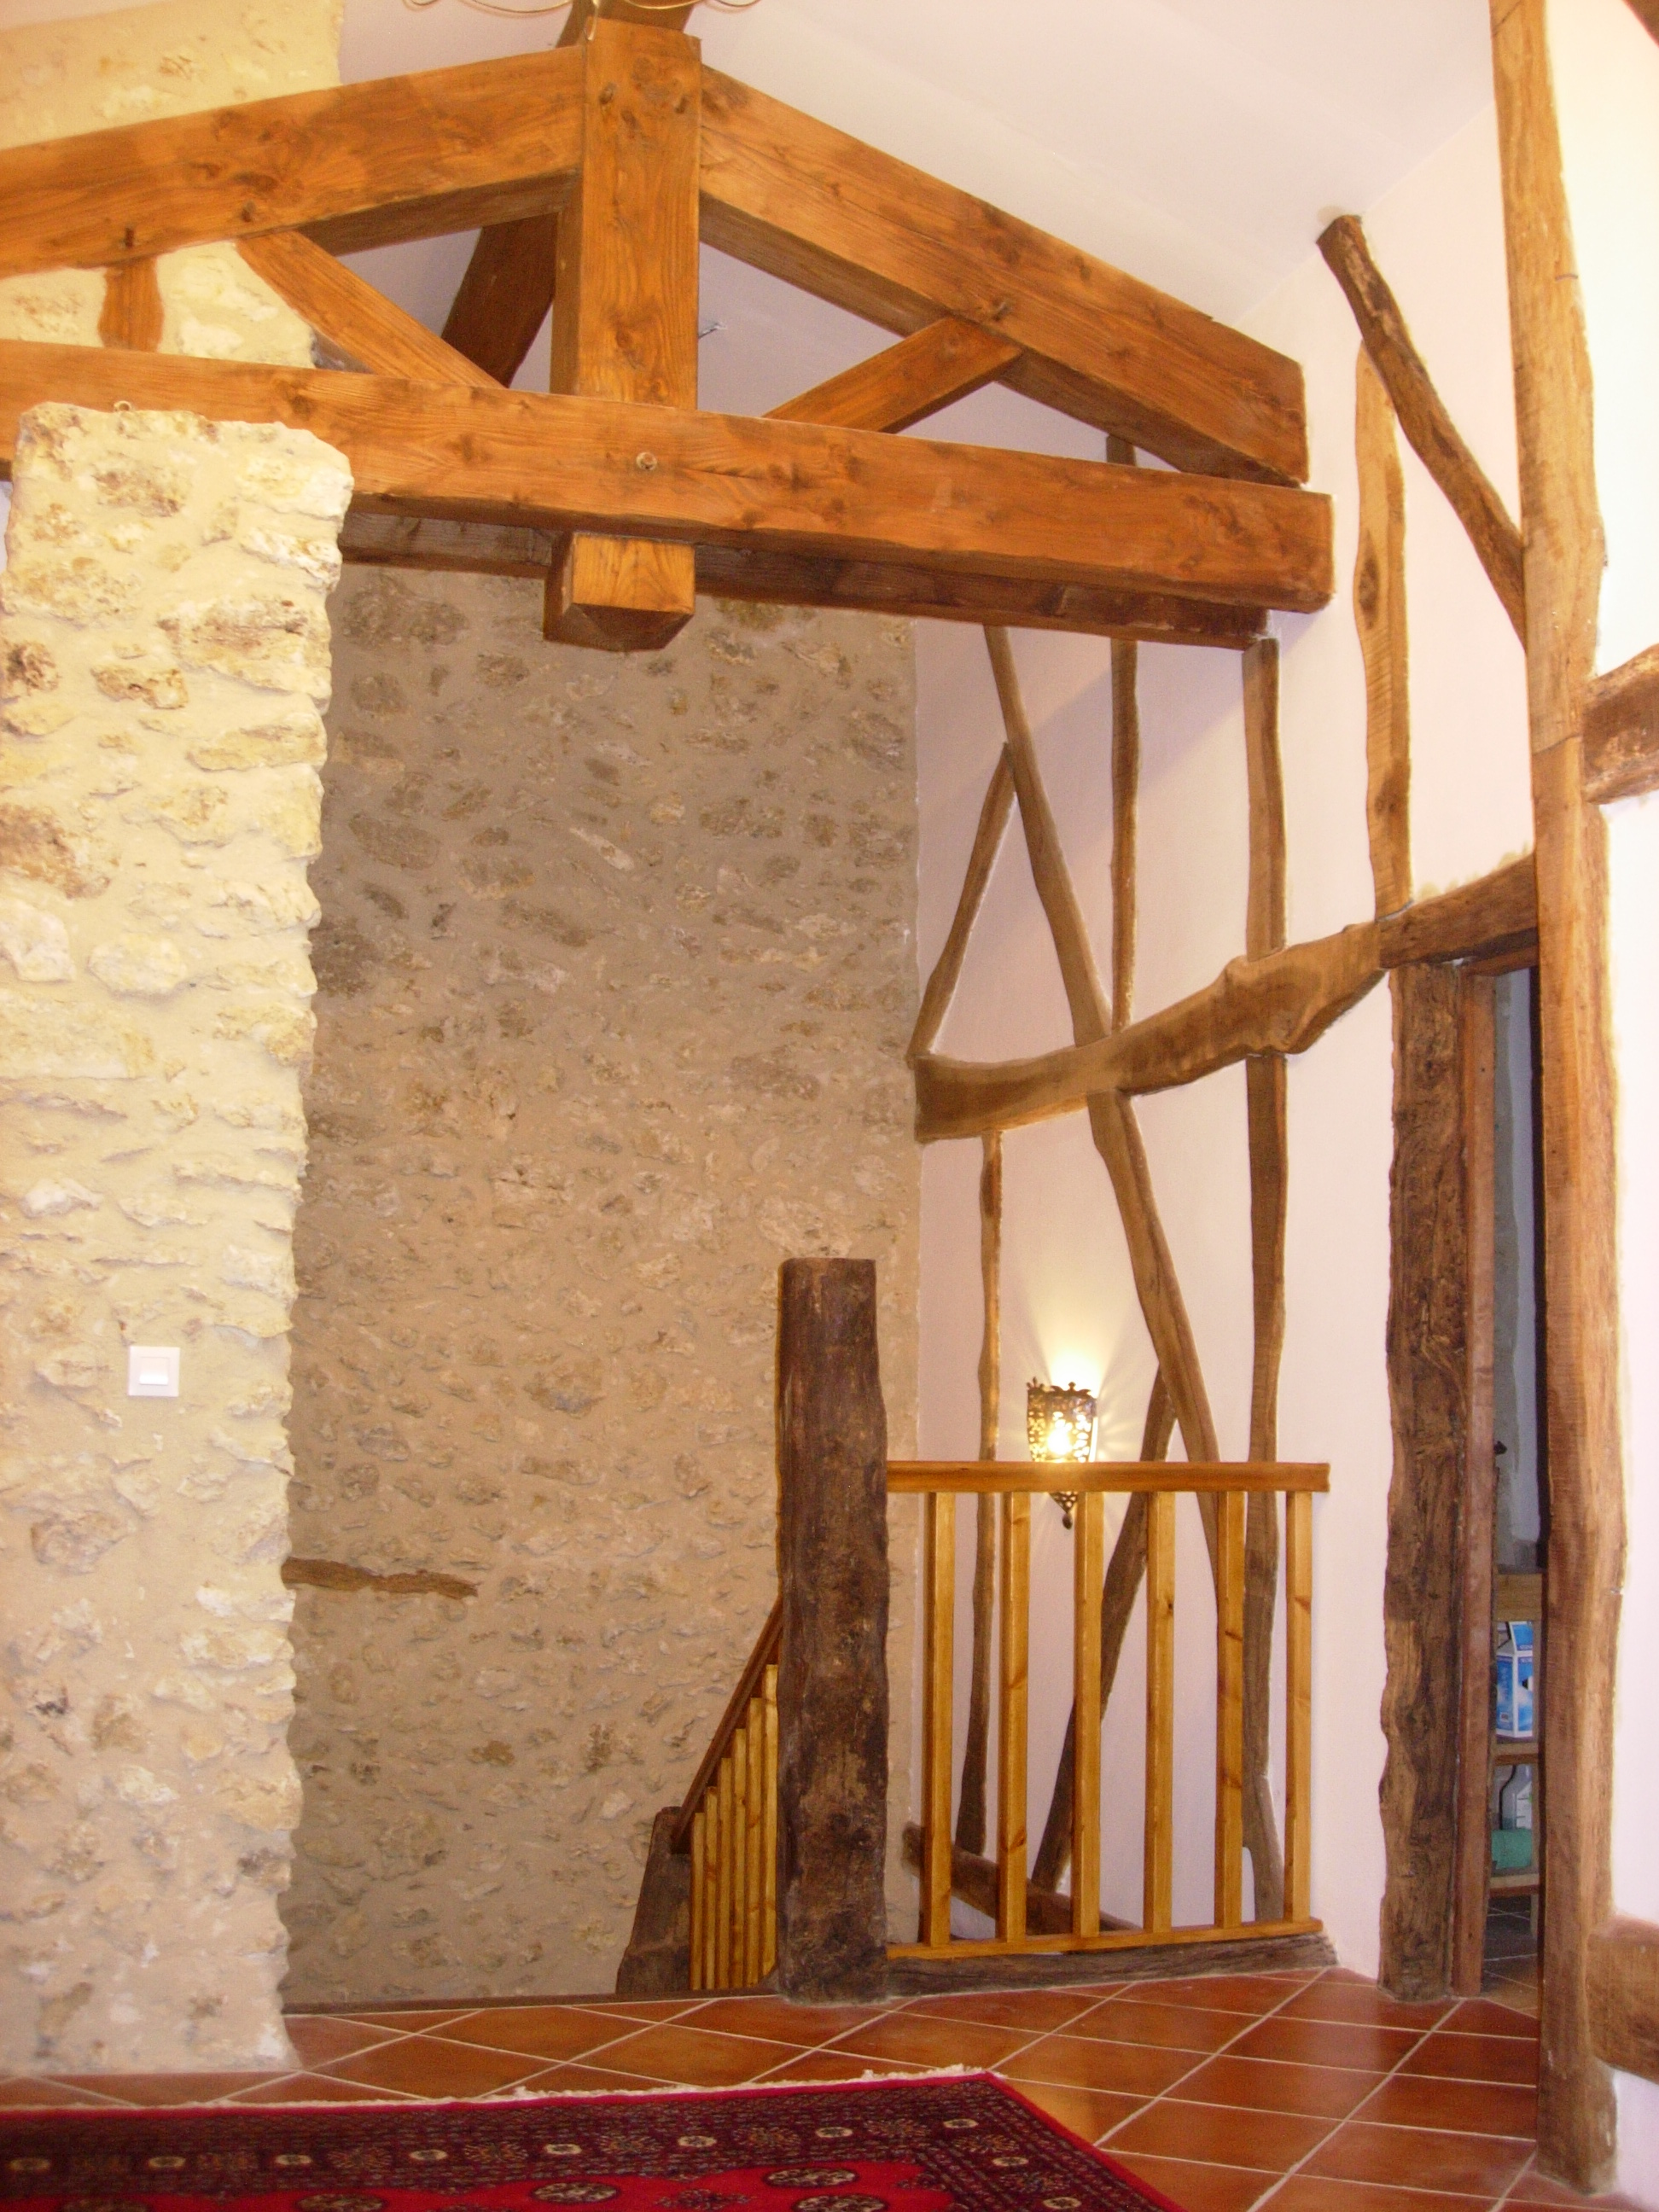 Exposed beams at Barrusclet French country gite